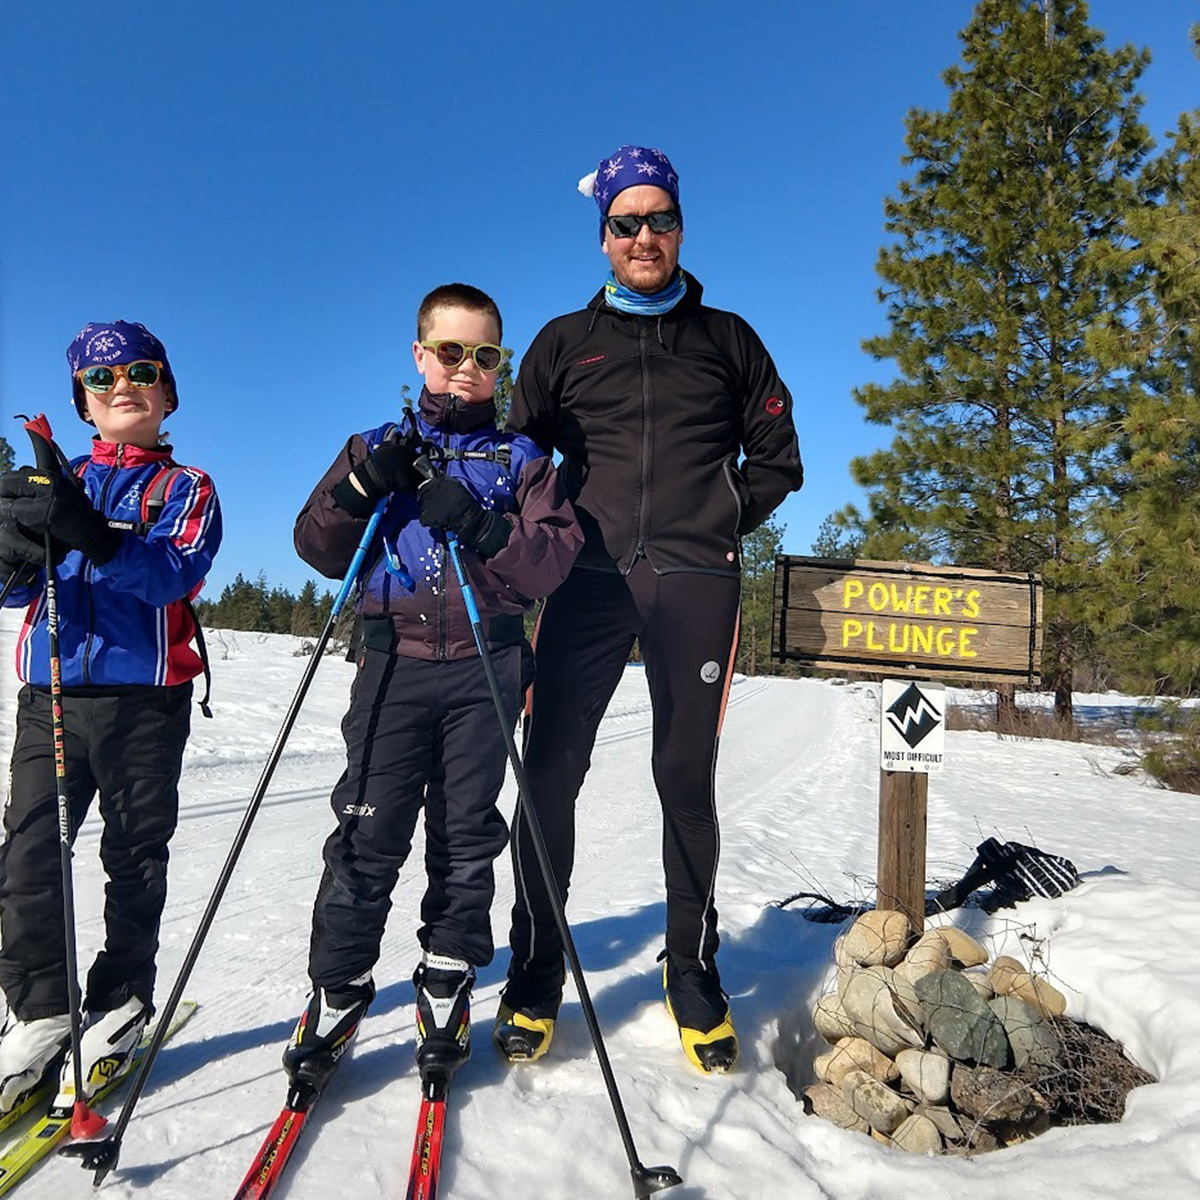 A family on the trail for nordic skiing